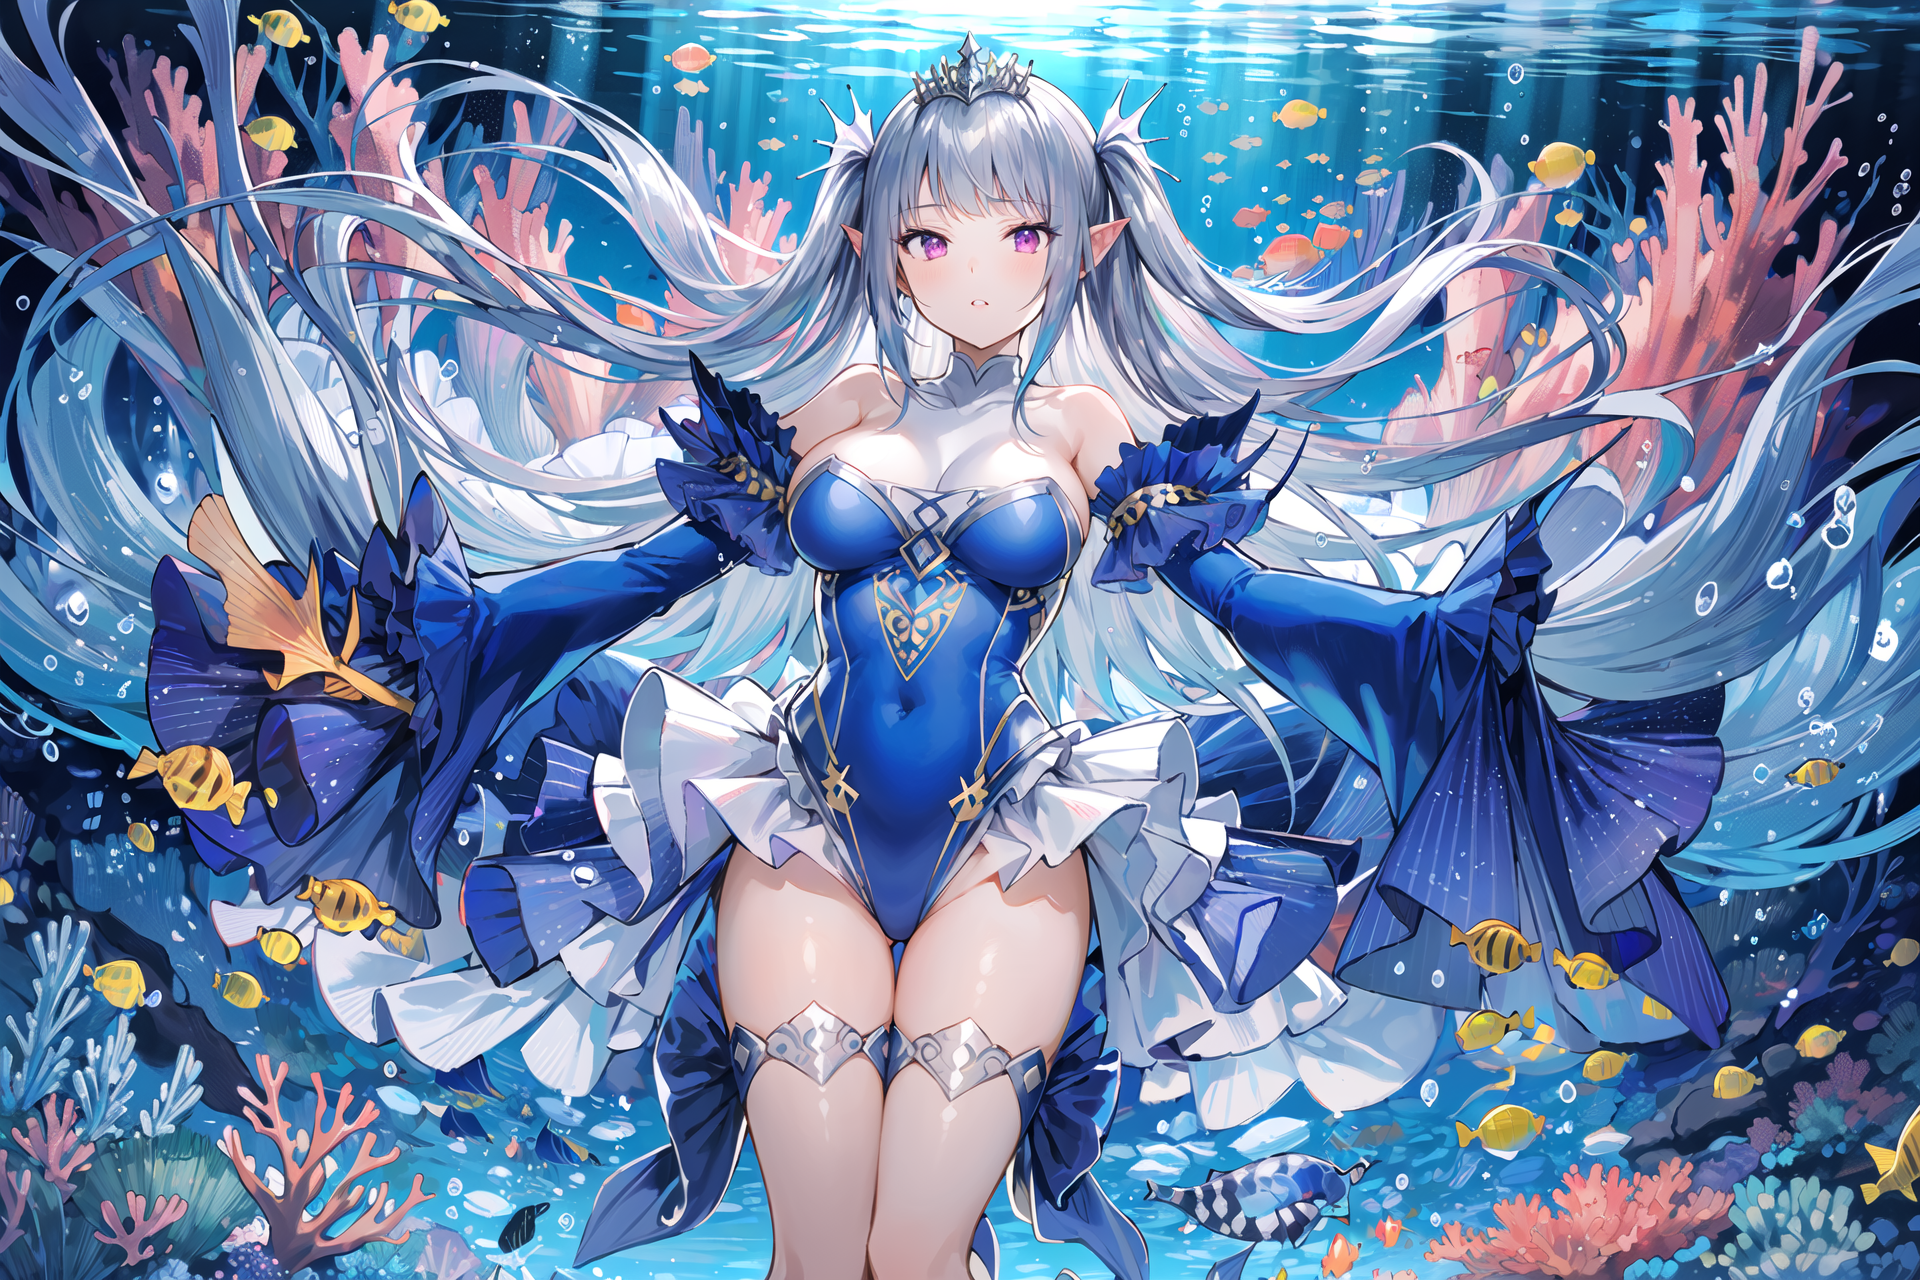 Anime 1920x1280 anime anime girls Yu-Gi-Oh! AI art Tearlaments Scheiren long hair gray hair twintails solo artwork digital art fan art pointy ears looking at viewer coral fish animals underwater in water water tiaras bubbles